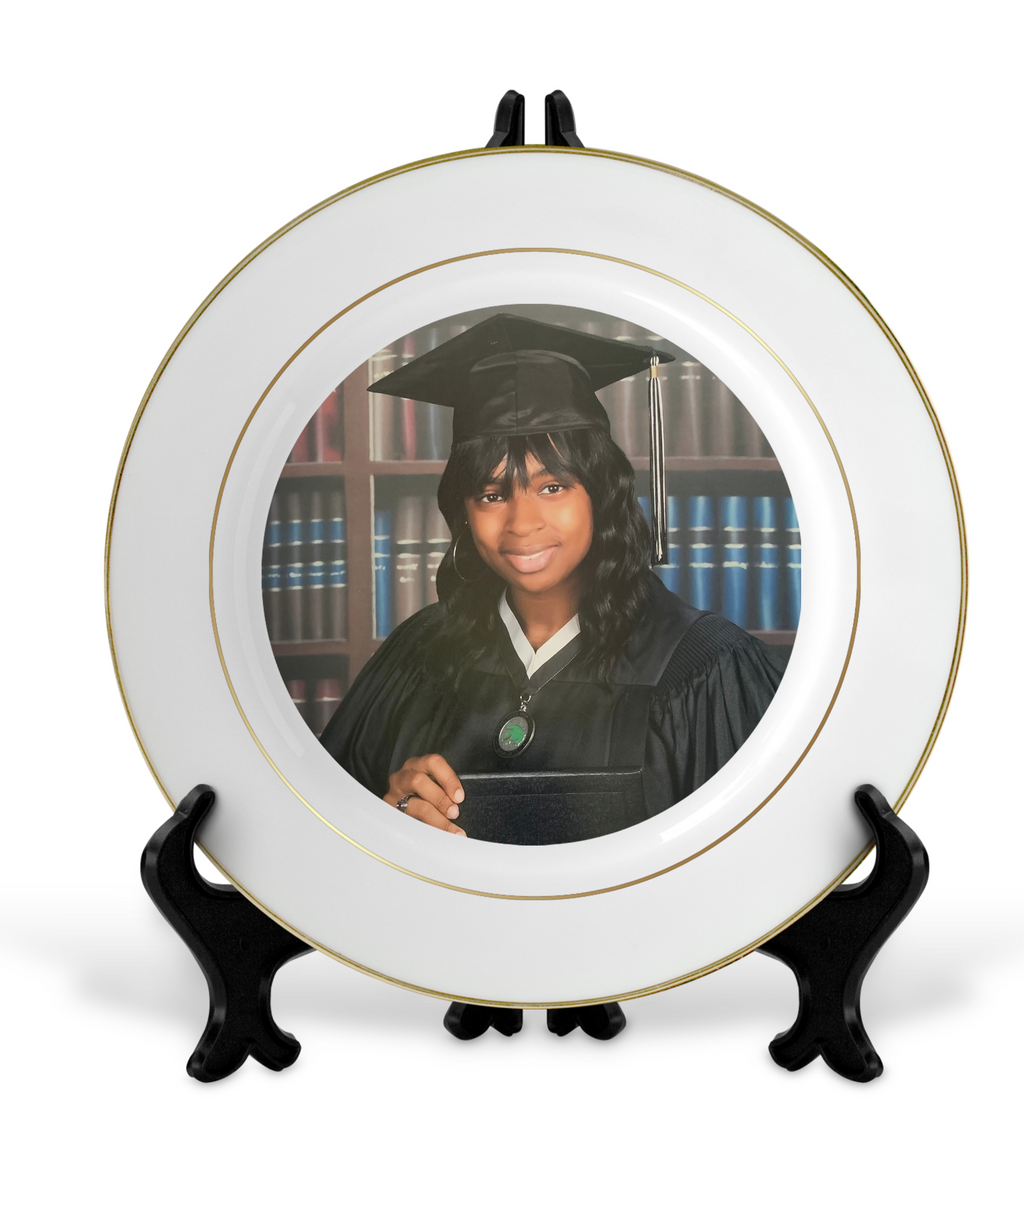 Customized 10" Rim Plate with Gold Trim| Personalized Ceramic Photo Plate| Custom Gold Accent Photo Gift Plate Keepsake with Stands and Gold Rims